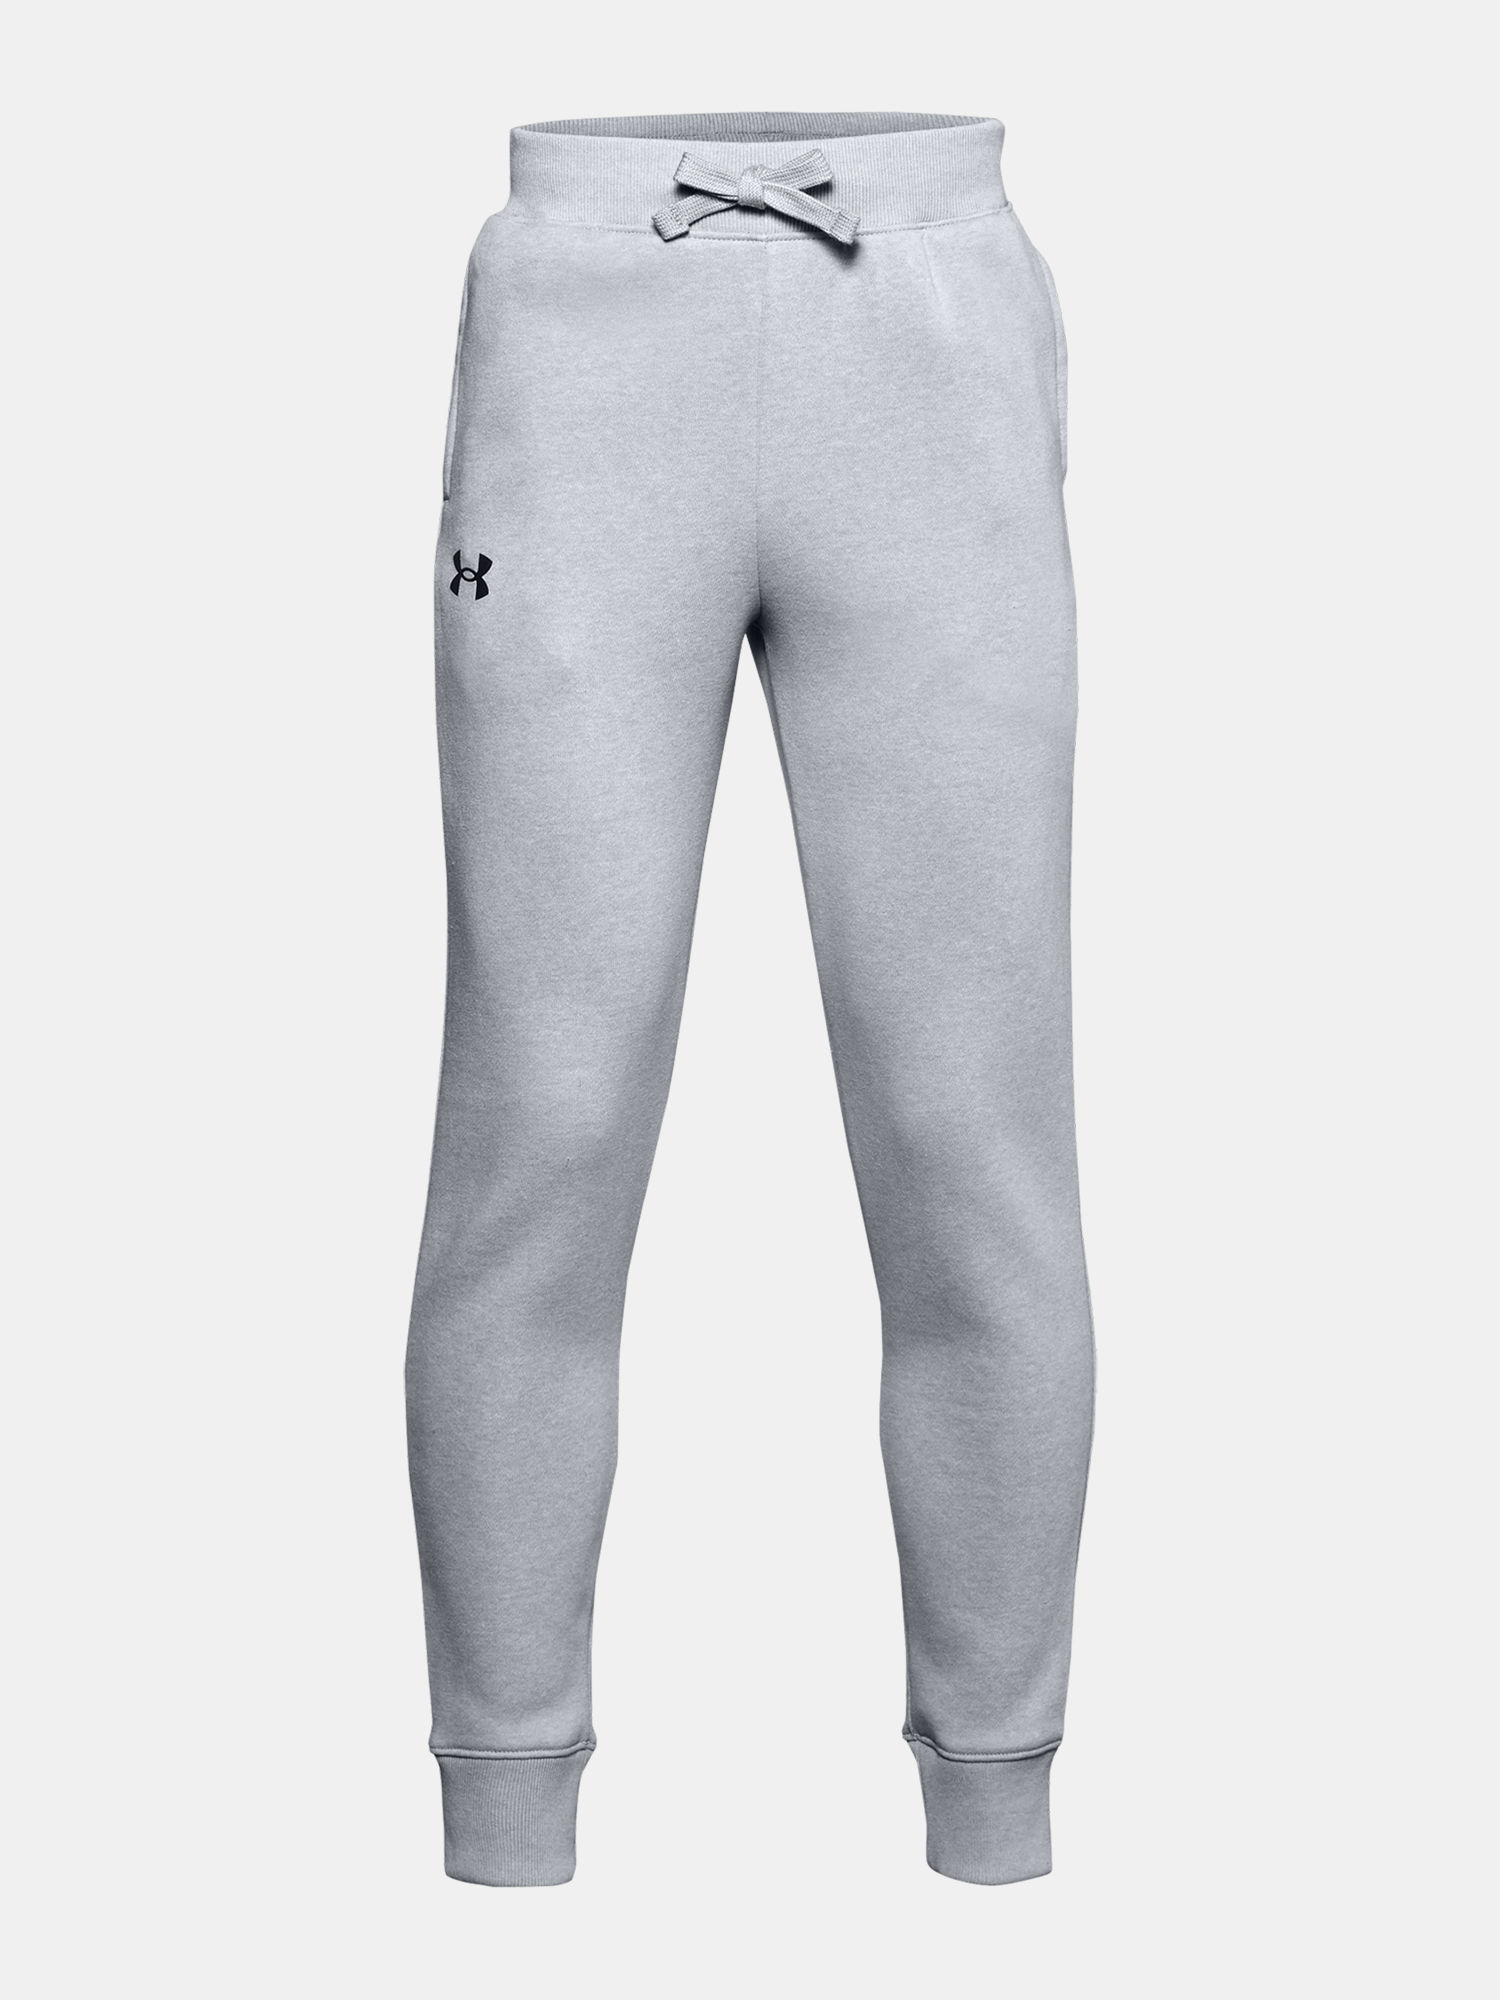 Kalhoty Under Armour RIVAL COTTON PANTS-GRY (1)